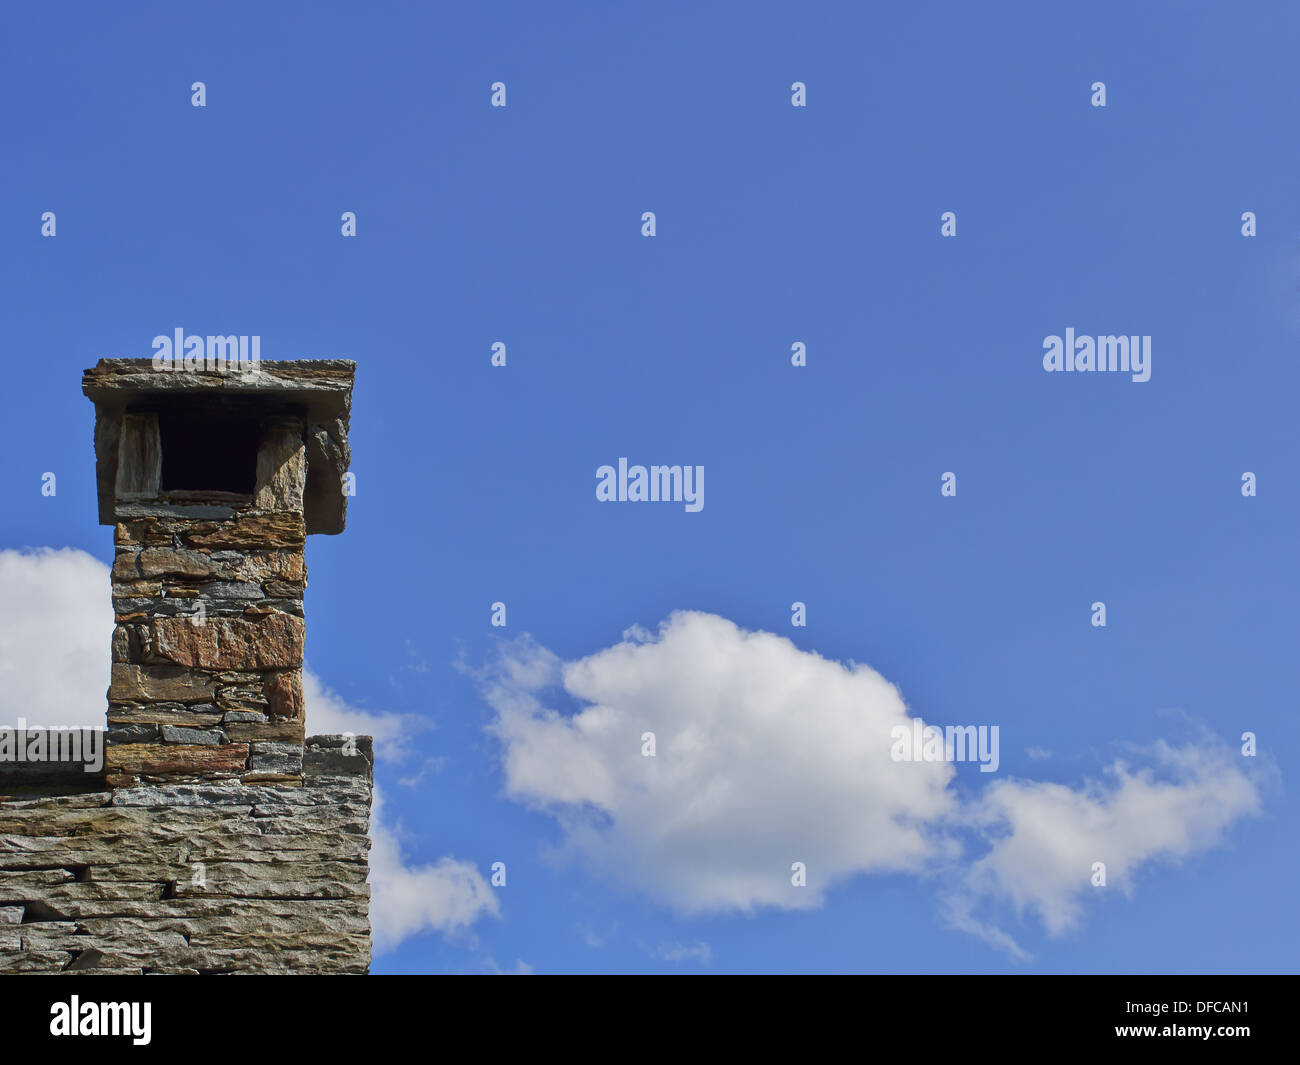 Chimney on an old slate roof with blue sky and some clouds Stock Photo